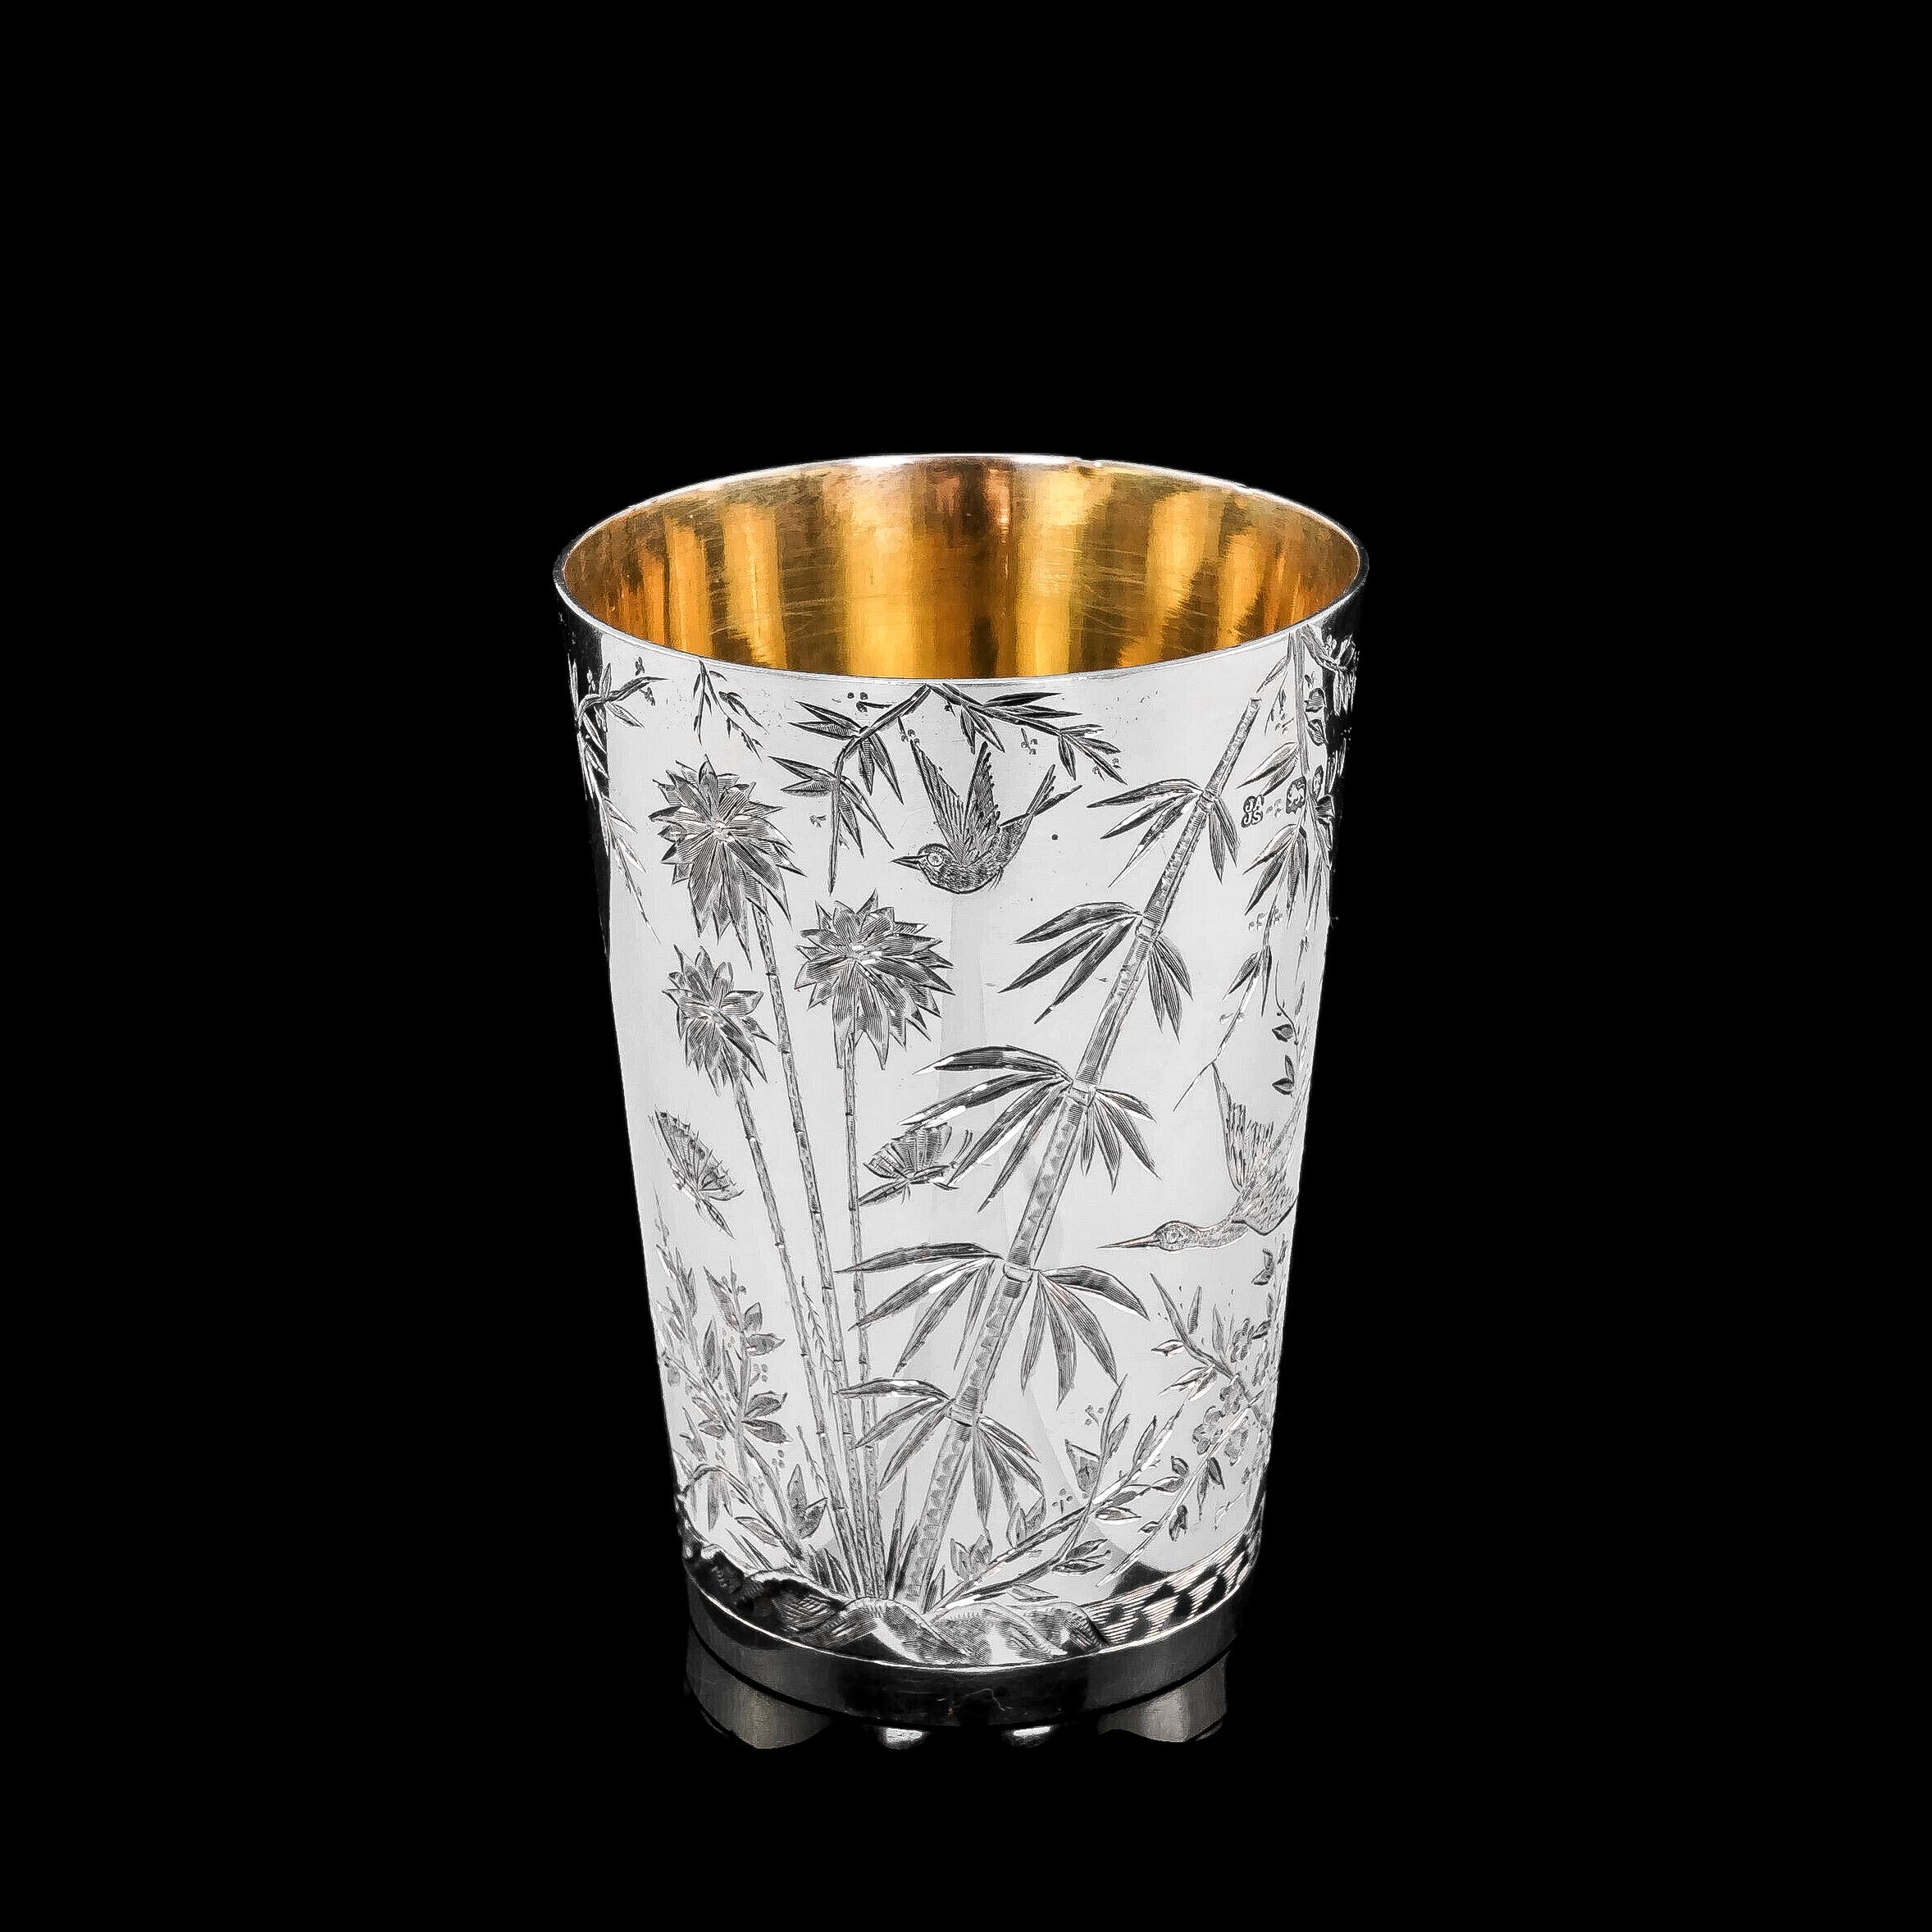 English Antique Solid Silver Aesthetic Style Beaker/Cup, John Adlwinckle & James Slater